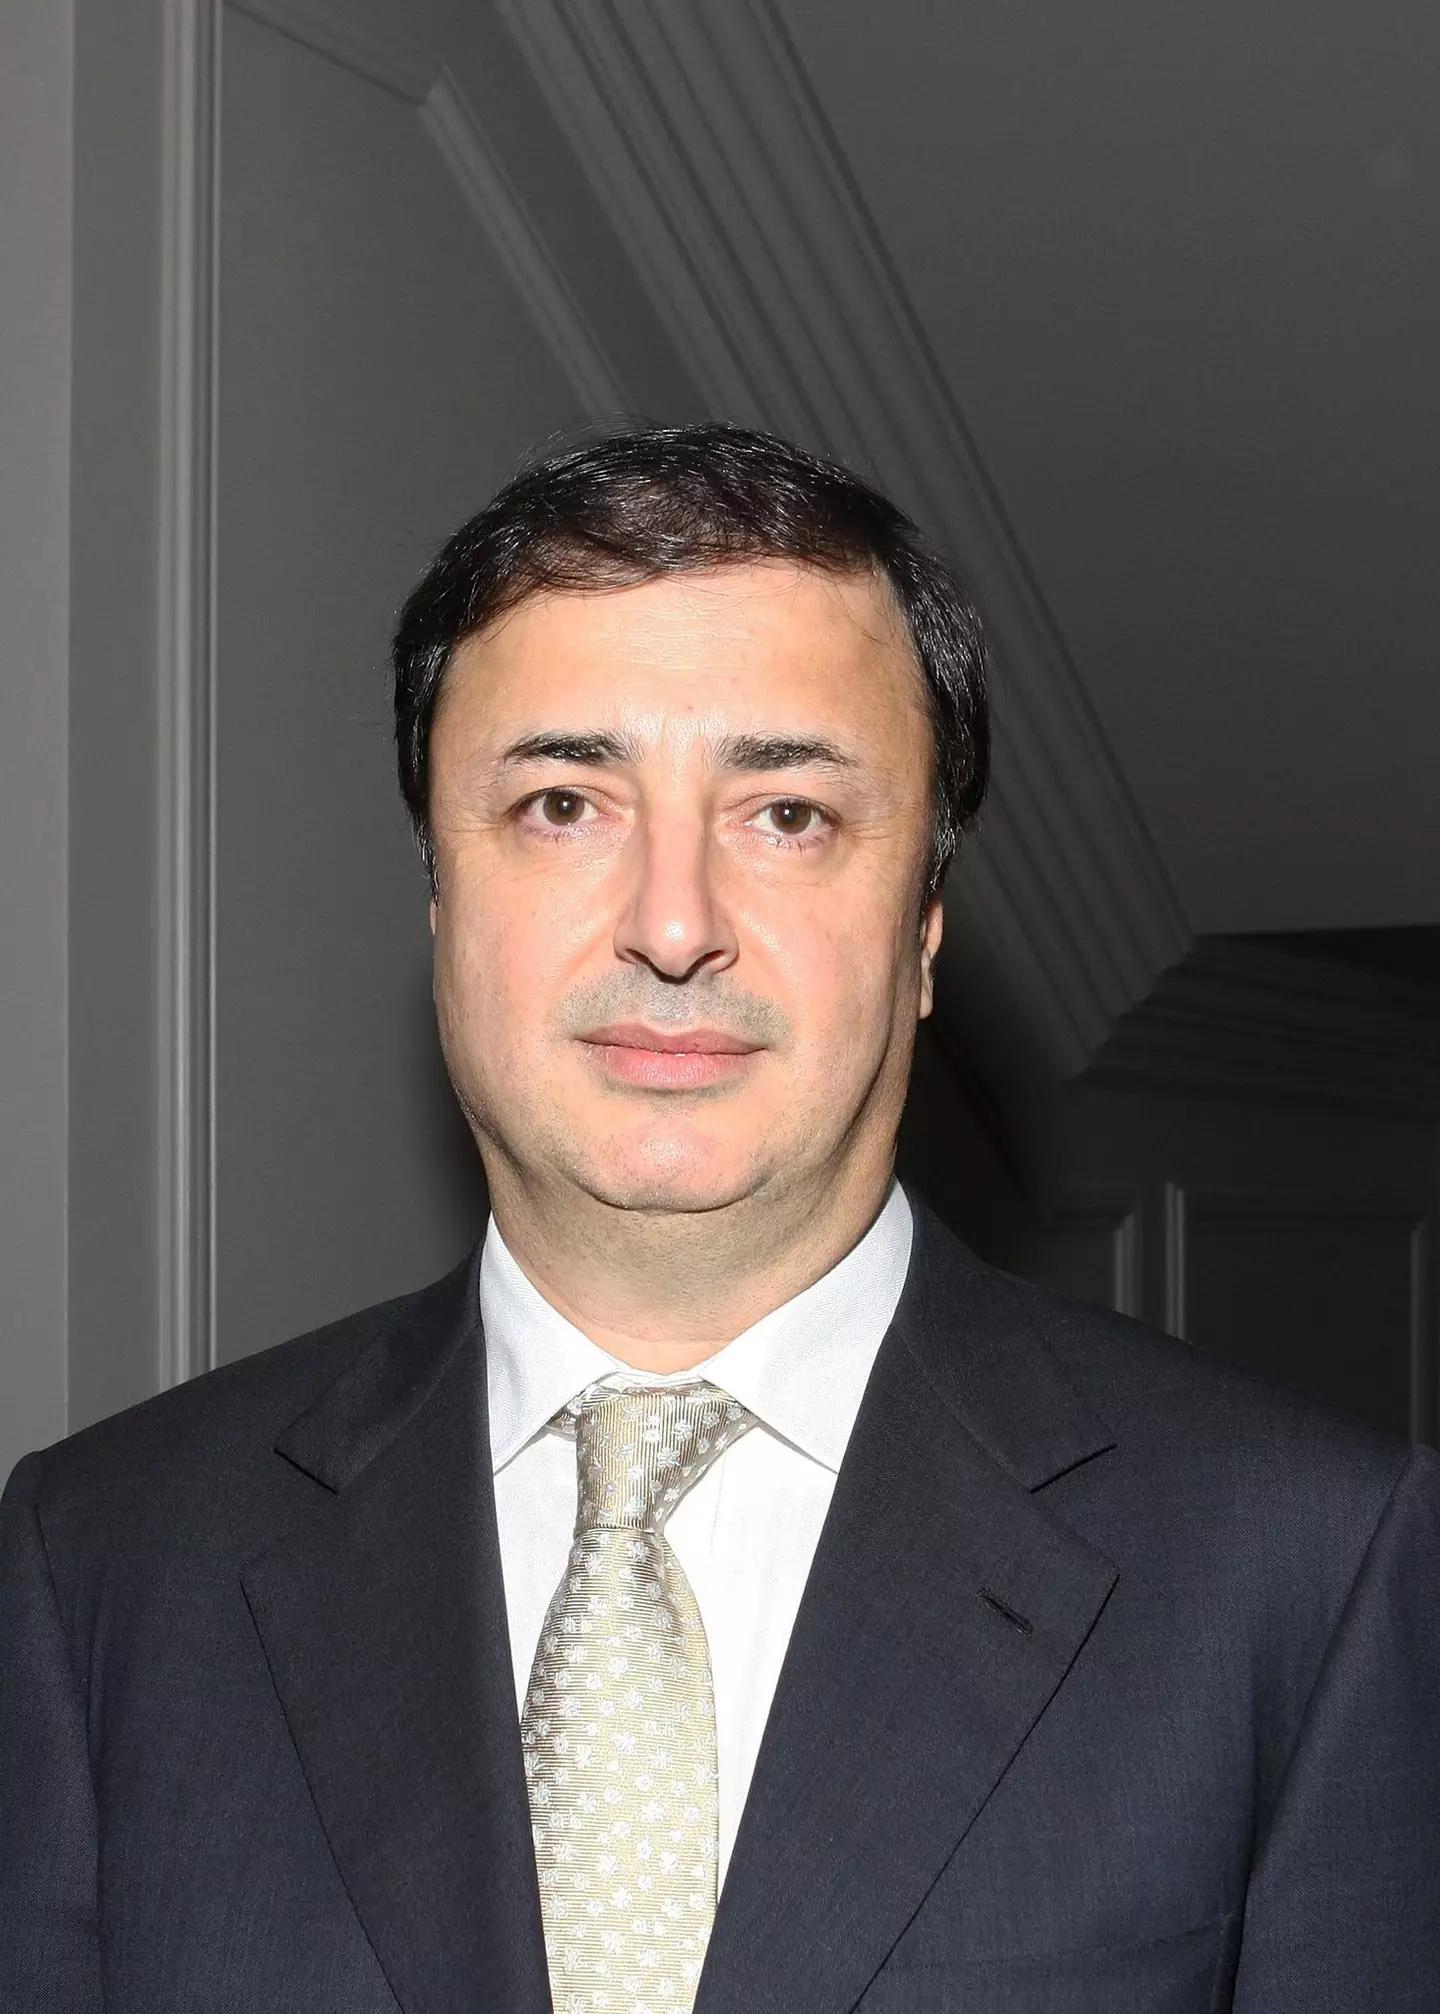 Hayut’s false identity of Leviev made him a well-off jetsetter and the son of Israeli businessman, Lev Leviev (WireImage/Bennett Raglin).